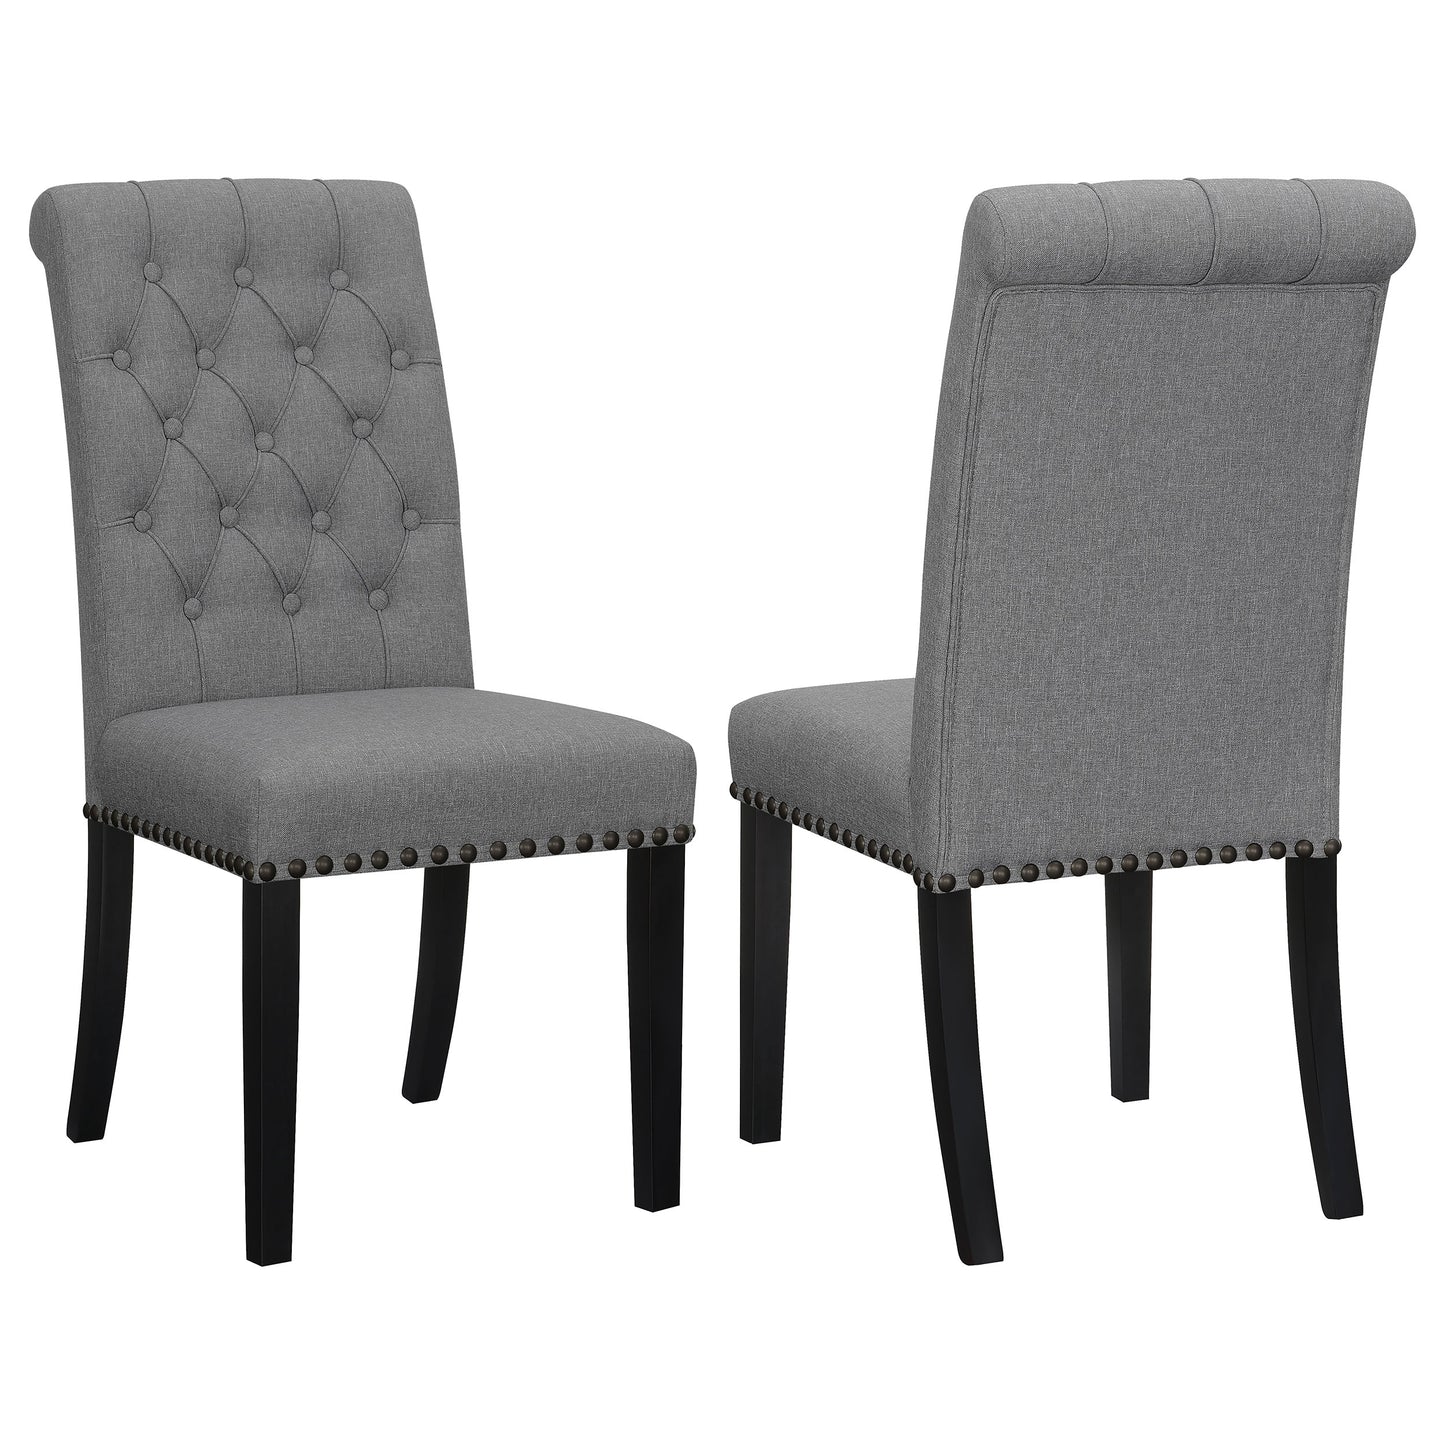 Alana Upholstered Tufted Side Chairs with Nailhead Trim (Set of 2)